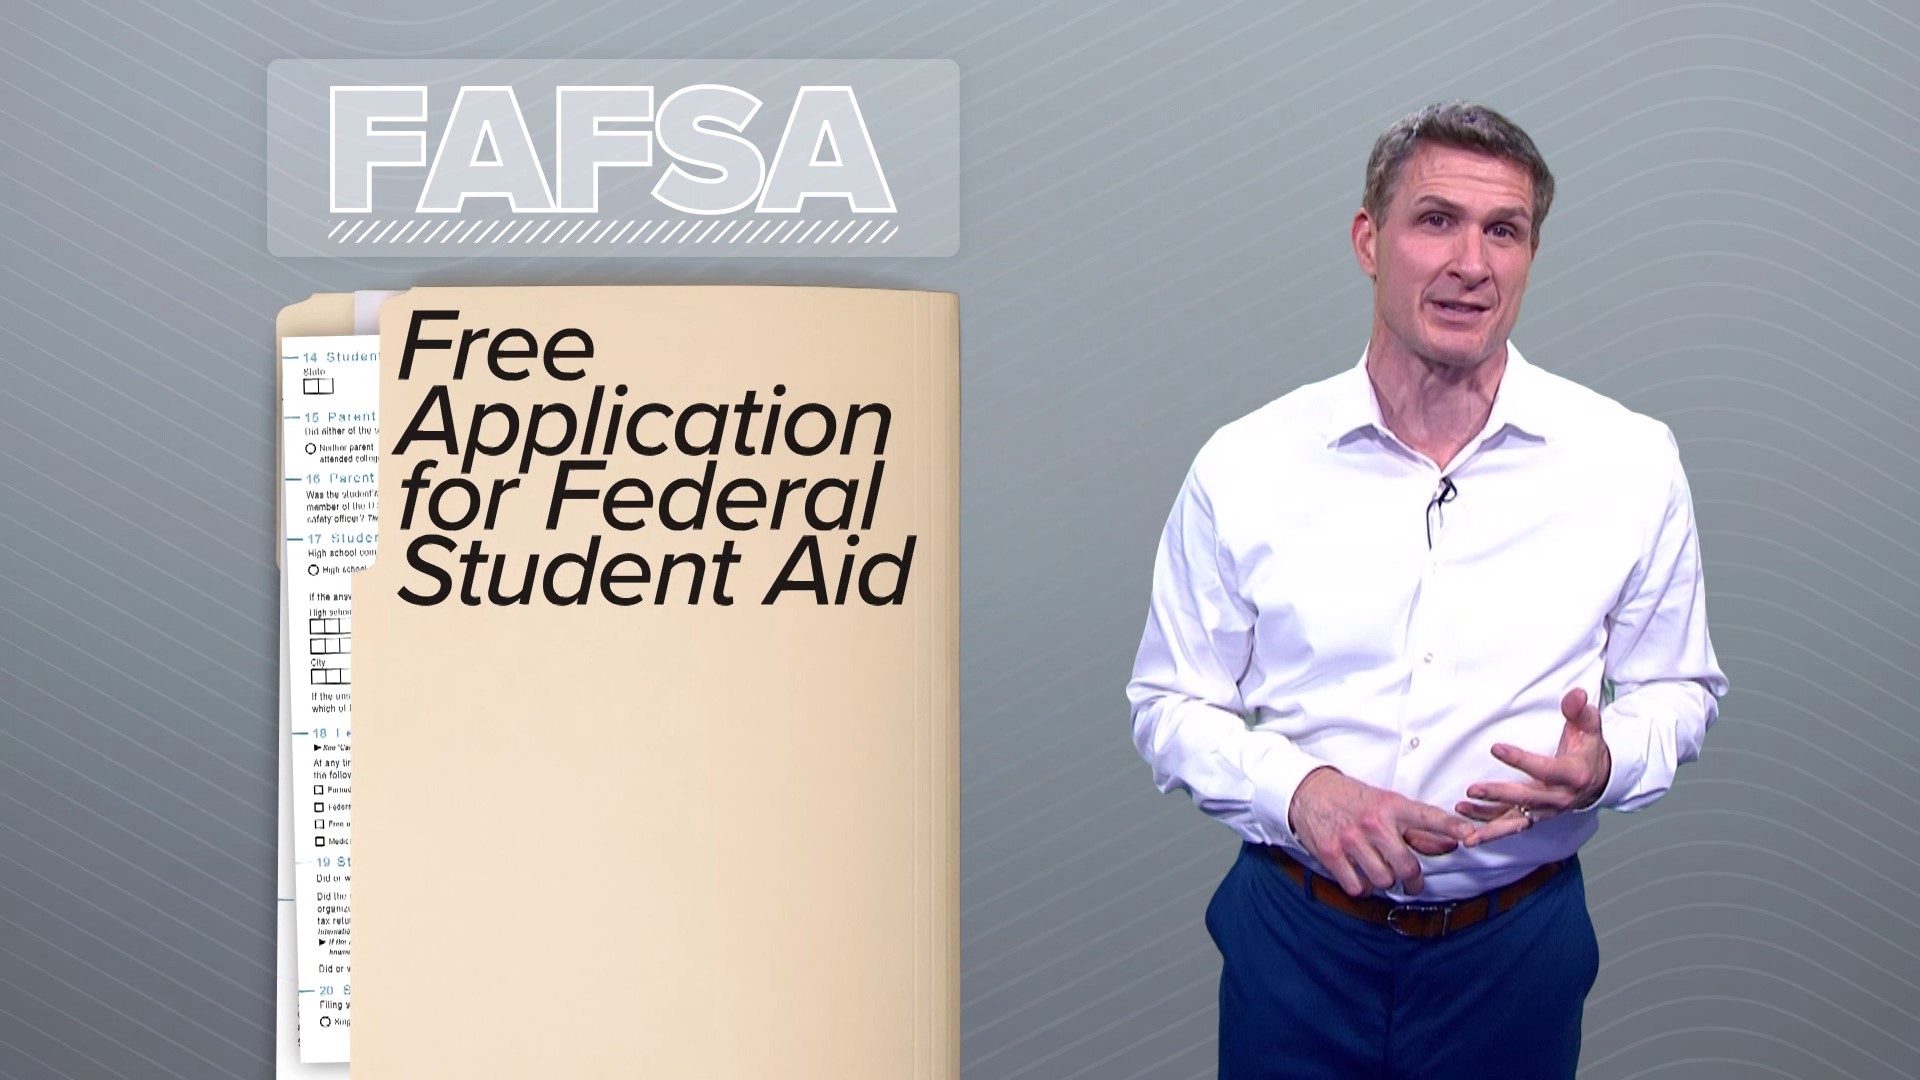 New information on the financial aid forms from the Department of Education and some Texas schools. One key detail: applications are way down.